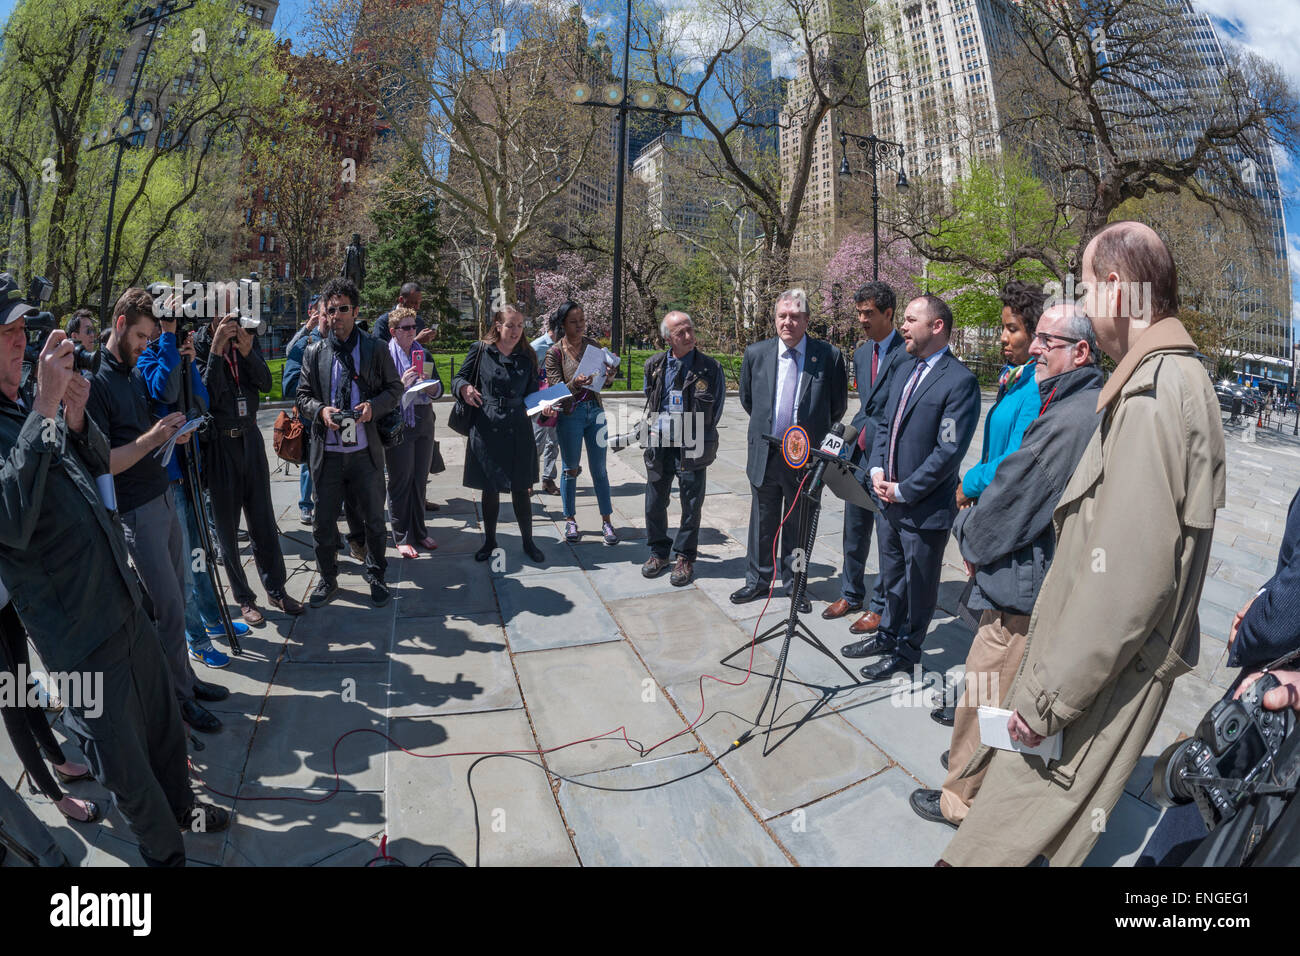 Council member Corey Johnson, at podium, with other members of the New York City Council and officers of the NY Press Photographers Association at a news conference at City Hall on Tuesday, April 28, 2015 calling for the restoration of the parking placards which were arbitrarily suspended by the NYPD in 2009. Without the parking privileges it is difficult for members of the press to cover breaking news without incurring summons'.(© Richard B. Levine) Stock Photo